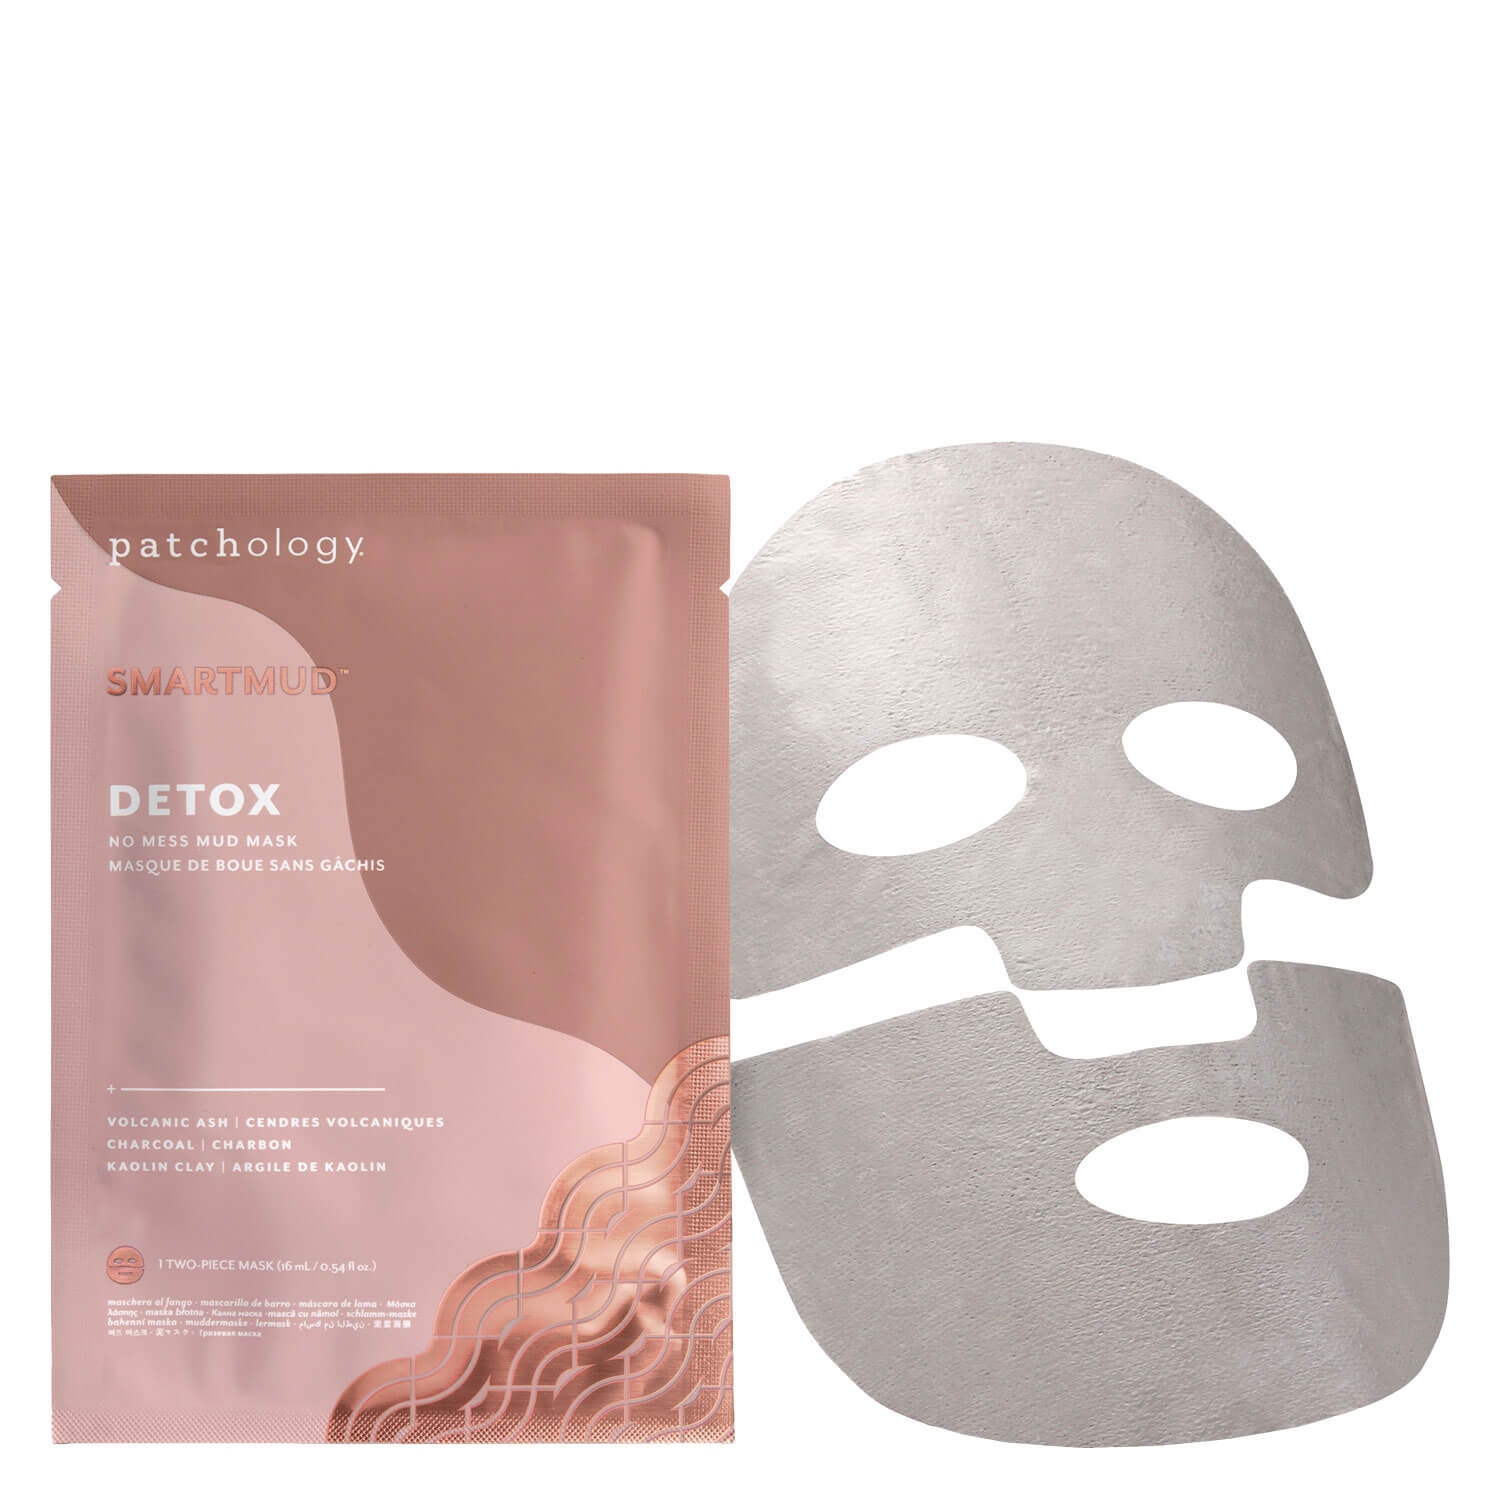 Product image from FlashMasque - SmartMud Detox No Mess Mud Mask